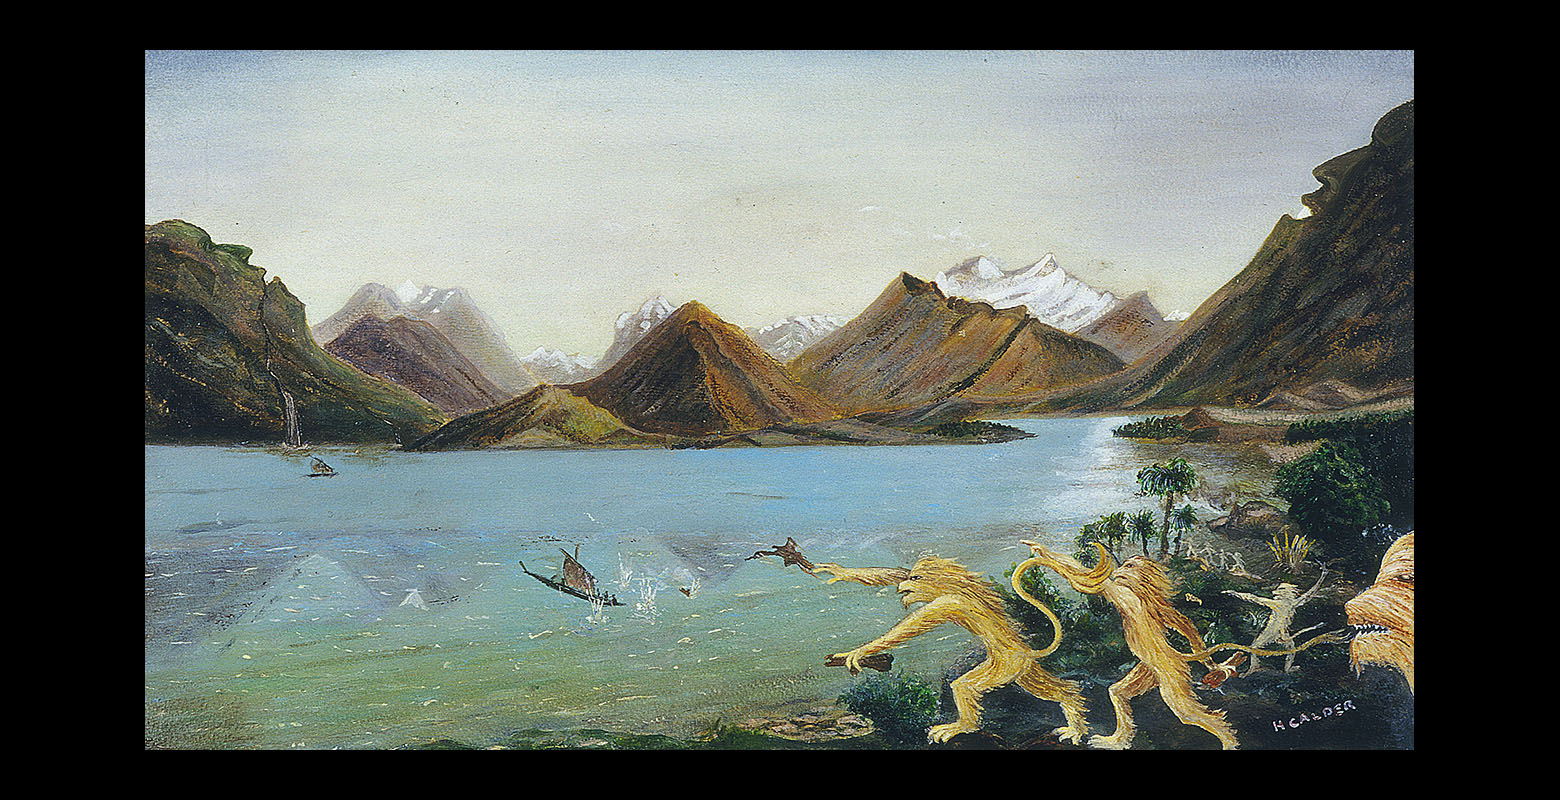 Painting of a sound, with mountains in the background. The two mountains flanking the edges appear to be faces looking skyward. In the foreground, lion-like creatures throw objects toward ships in the water